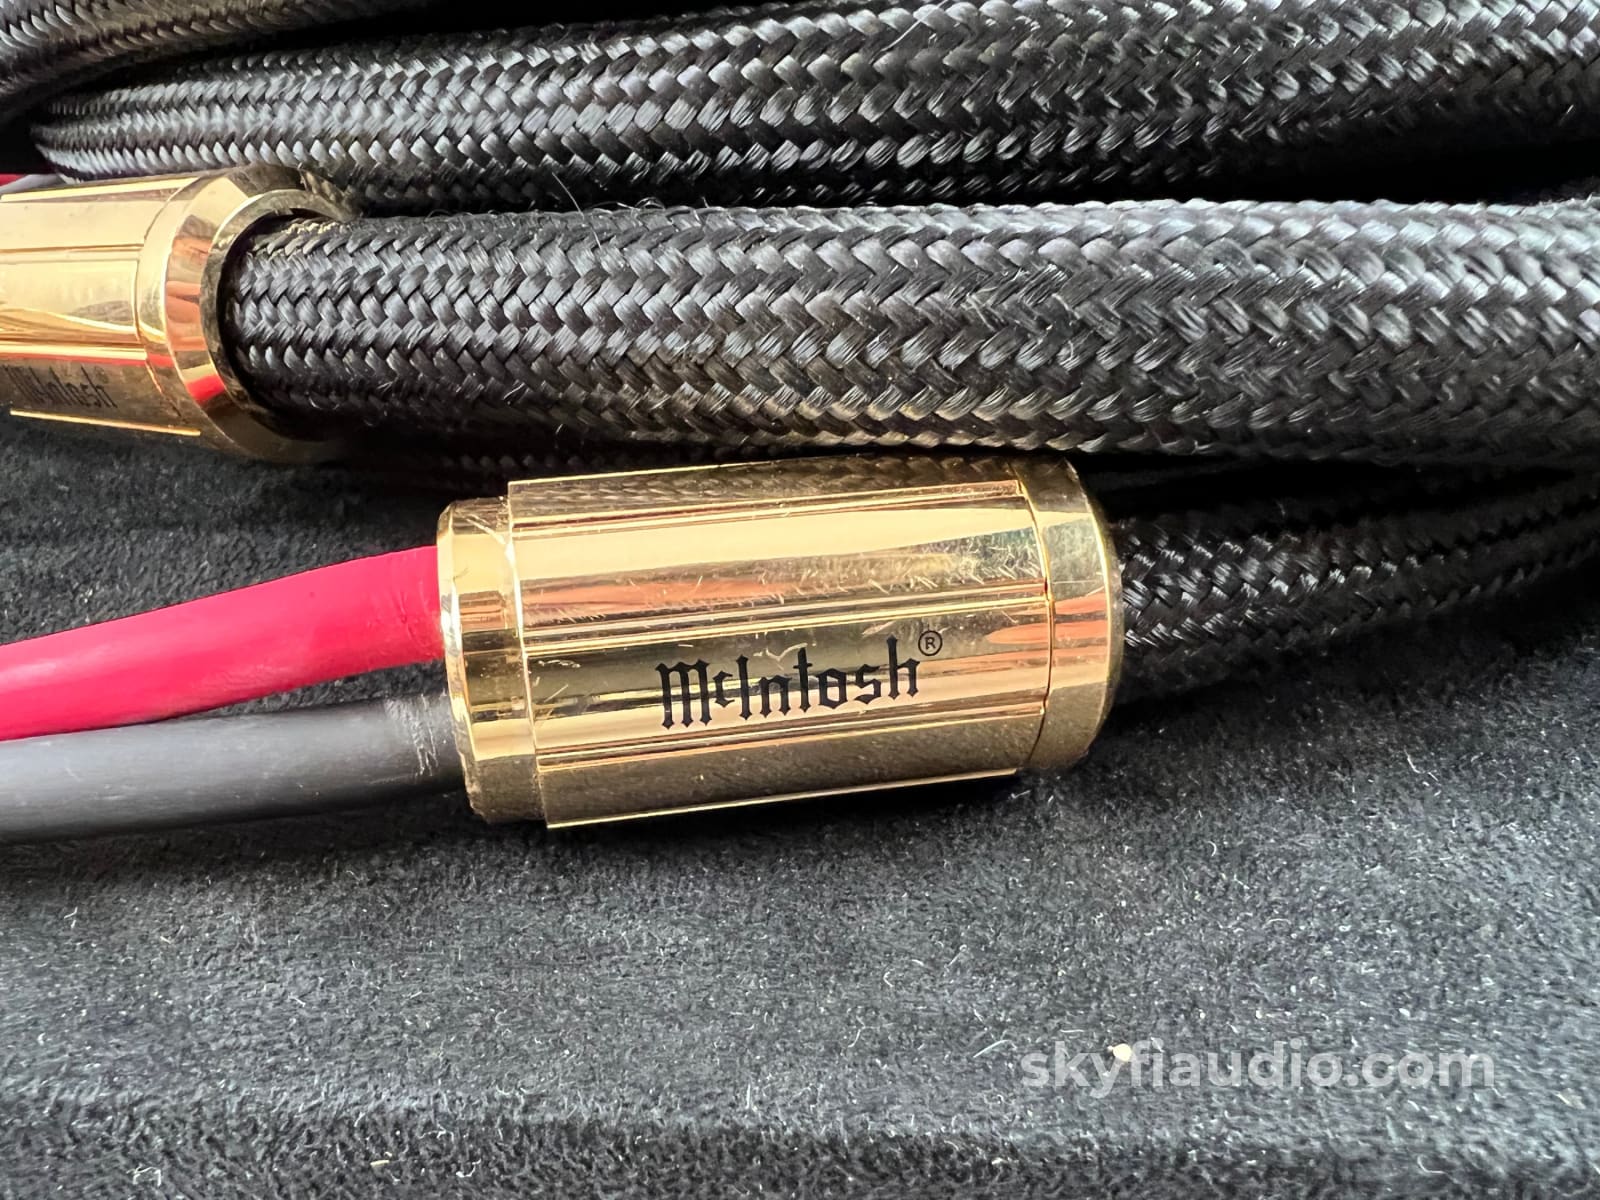 Mcintosh Custom Length Speaker Cables (Pair) - 6M In Store Only